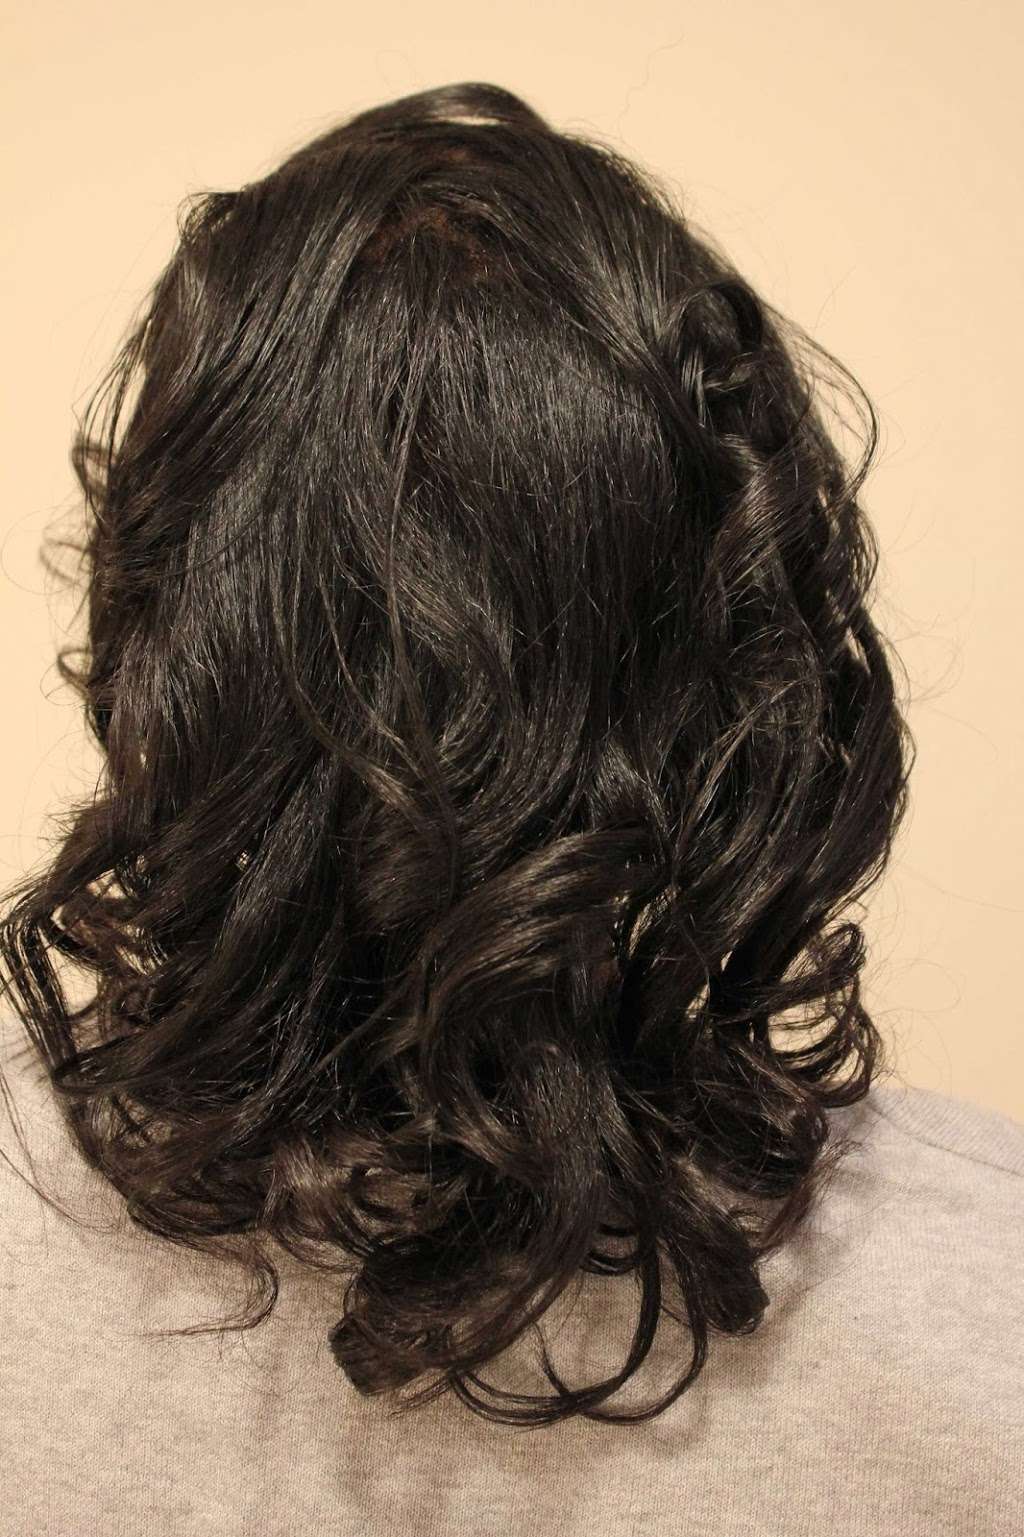 Hair By Natalie at PG Plaza | 3704 East-West Hwy #114, Hyattsville, MD 20782, USA | Phone: (240) 643-2299